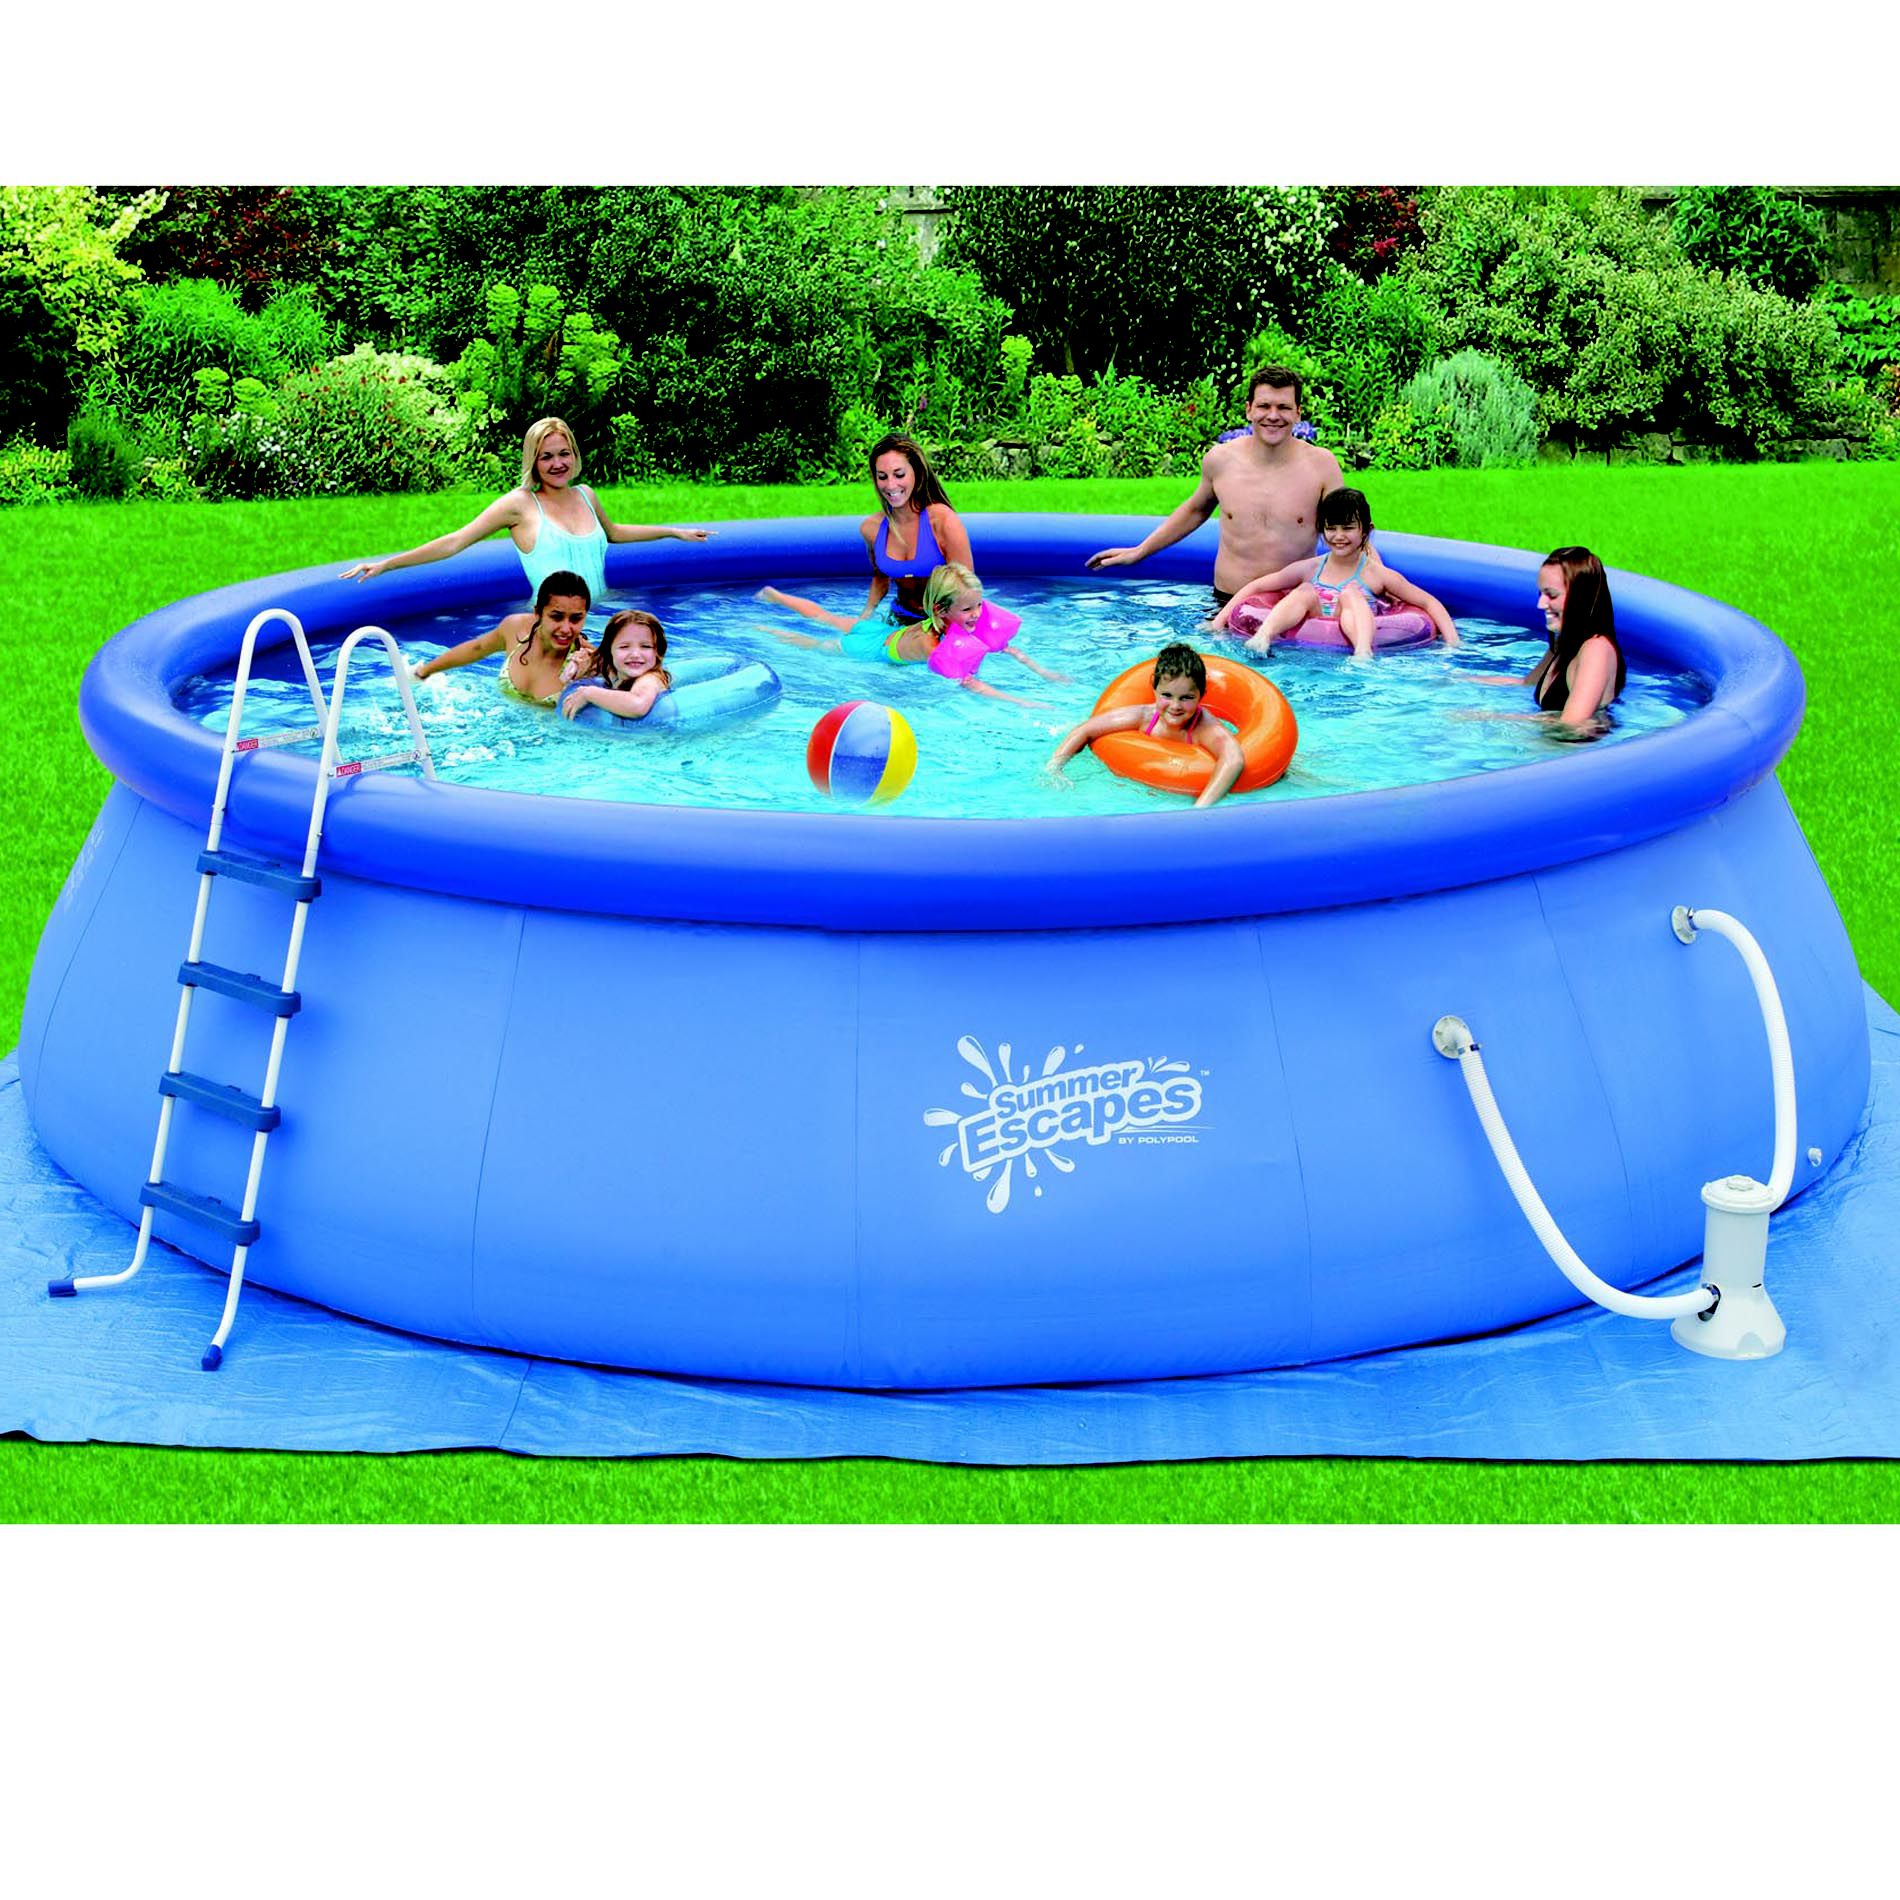 Summer Escapes 18ft X 48in Quick Set Ring Pool | Shop Your Way: Online